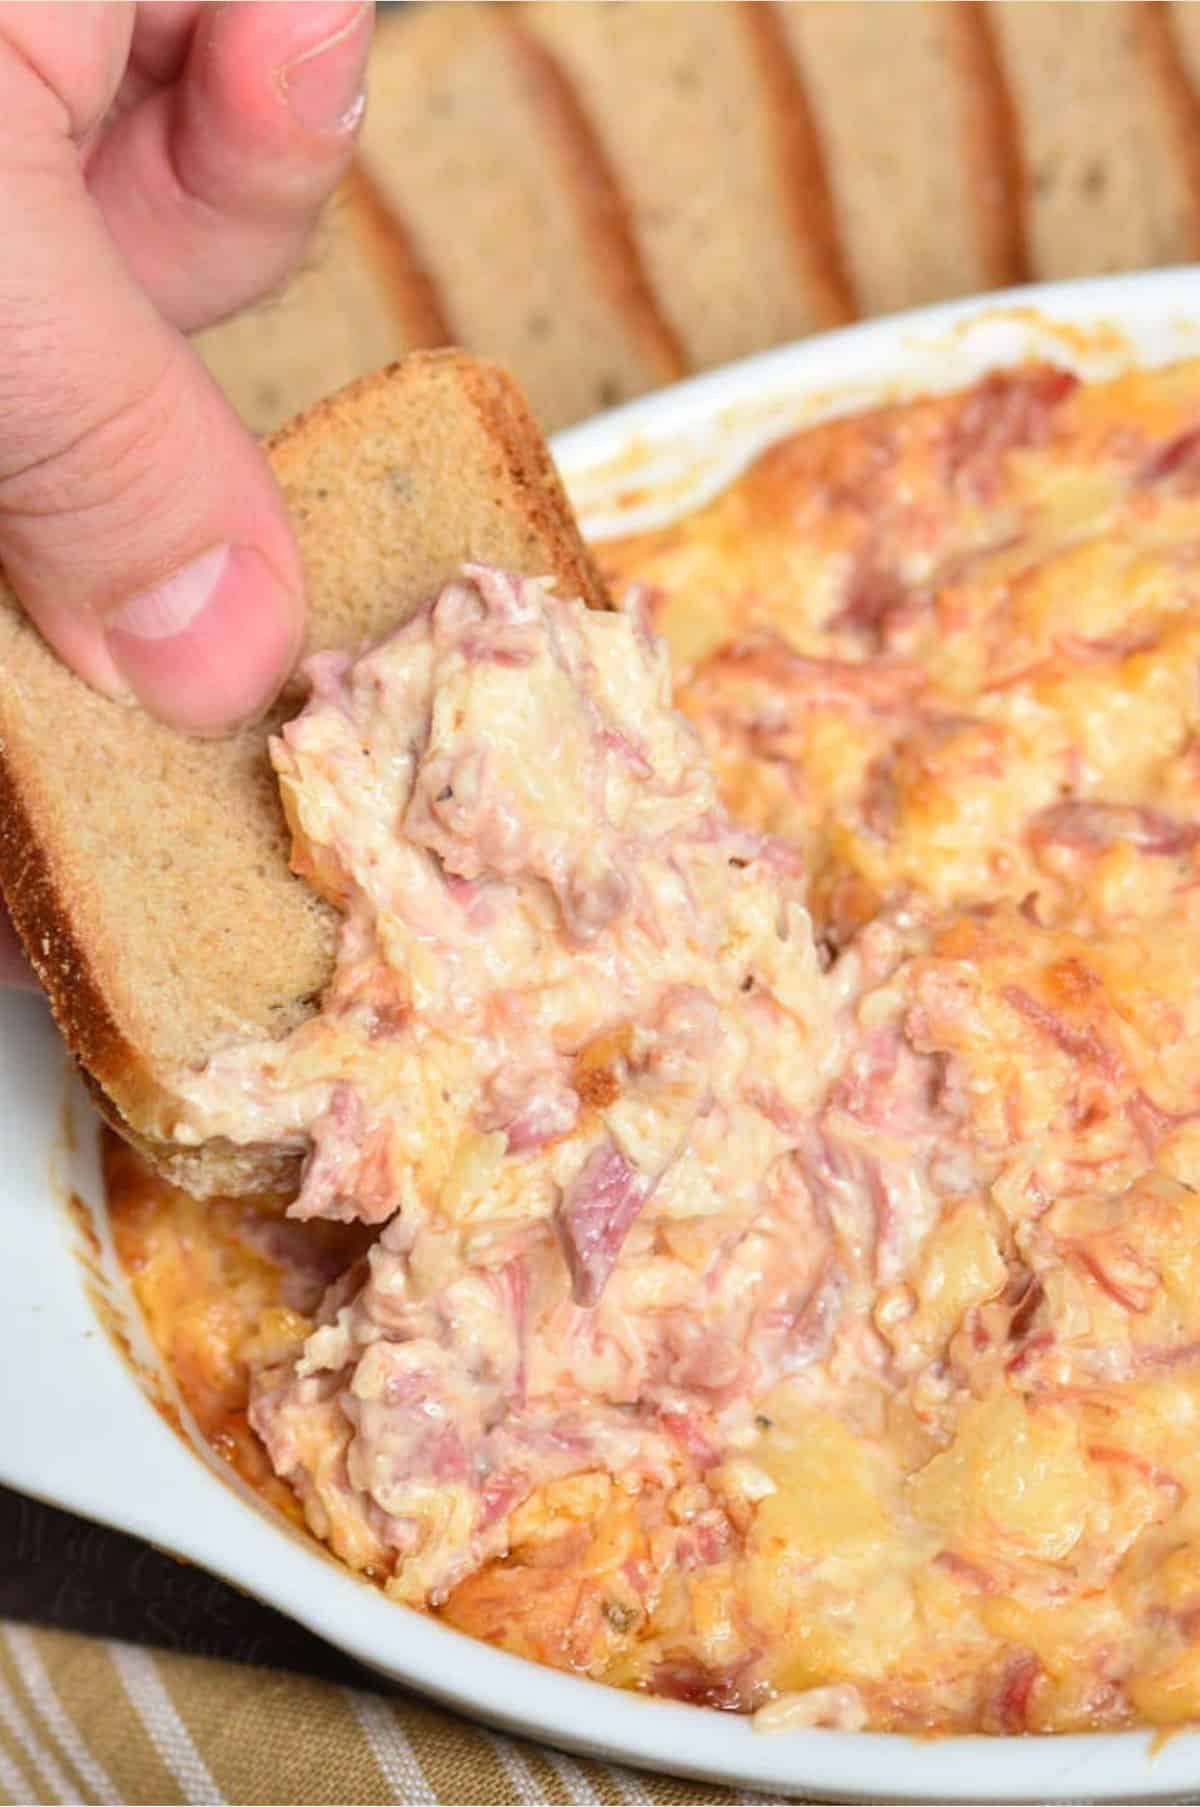 Scooping up some Reuben dip onto a piece of bread.